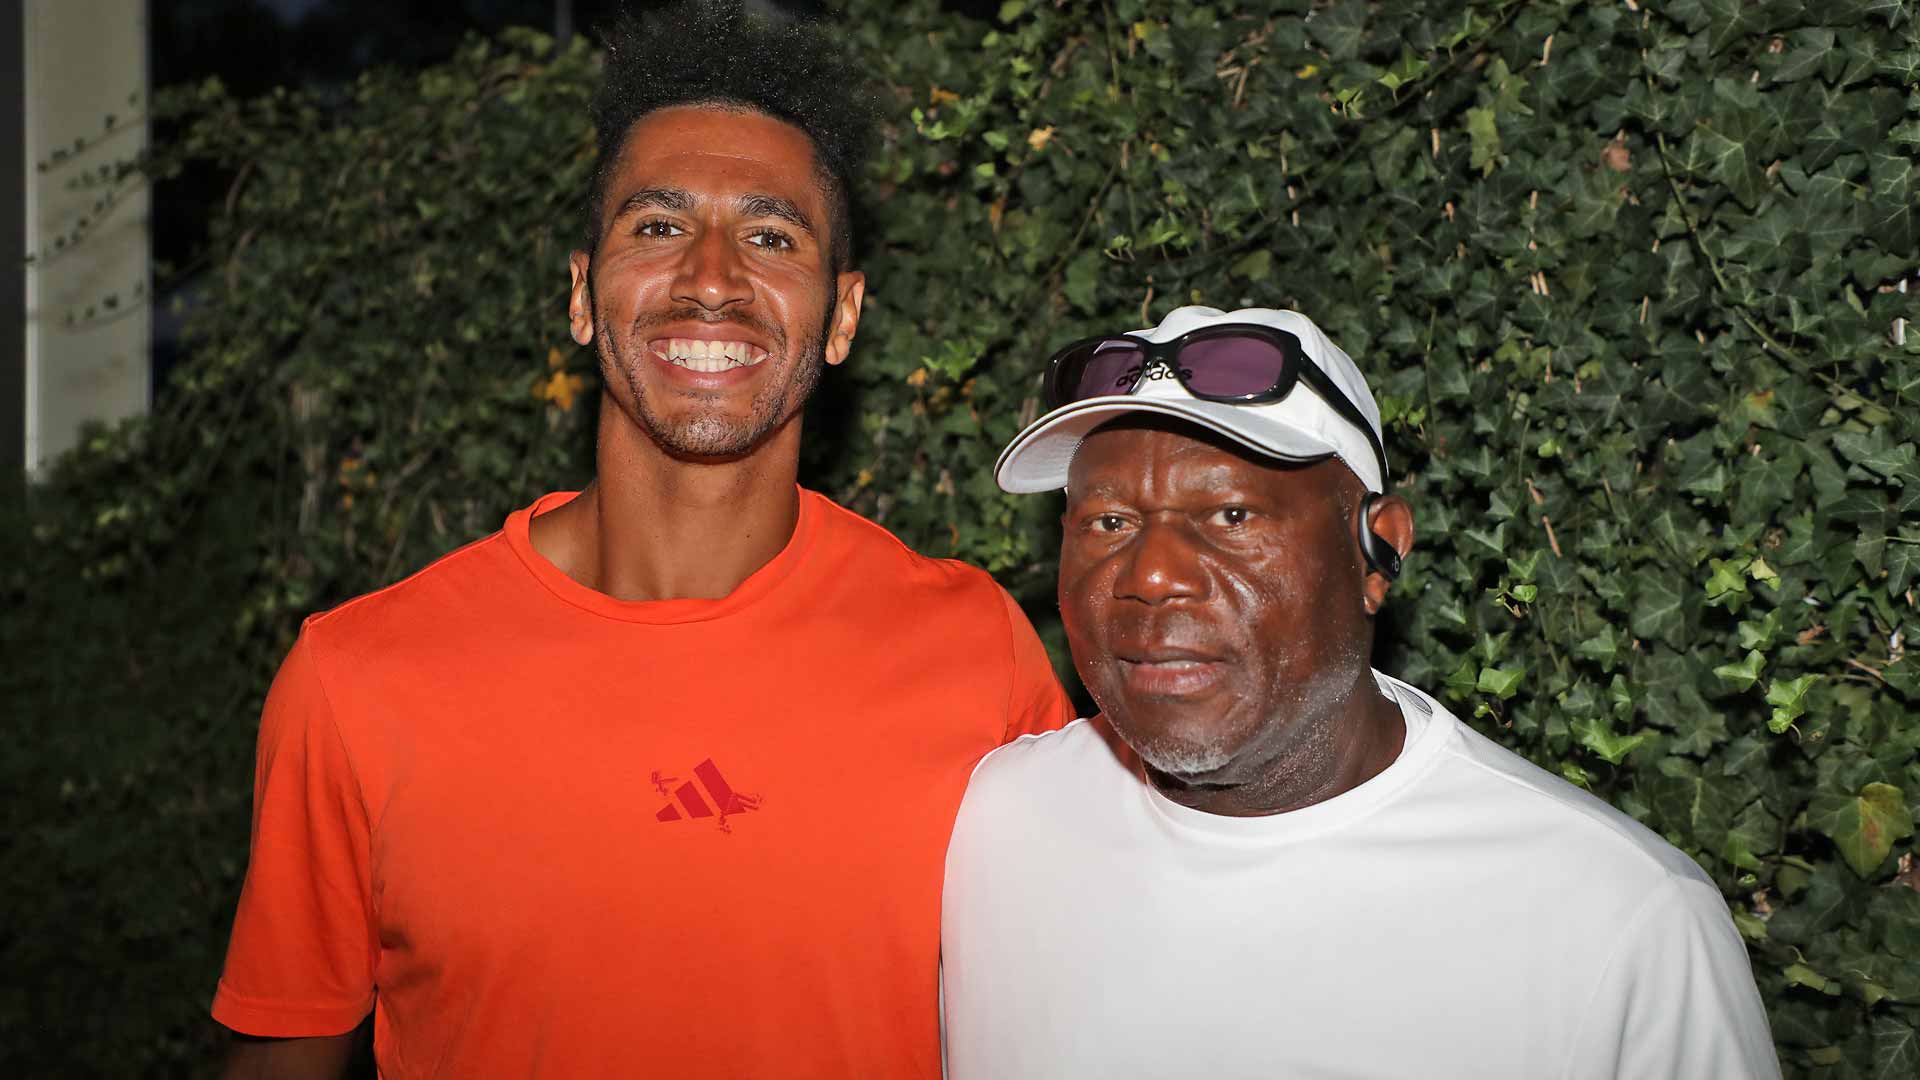 Michael Mmoh poses for a photo with his father and former professional, Tony Mmoh.